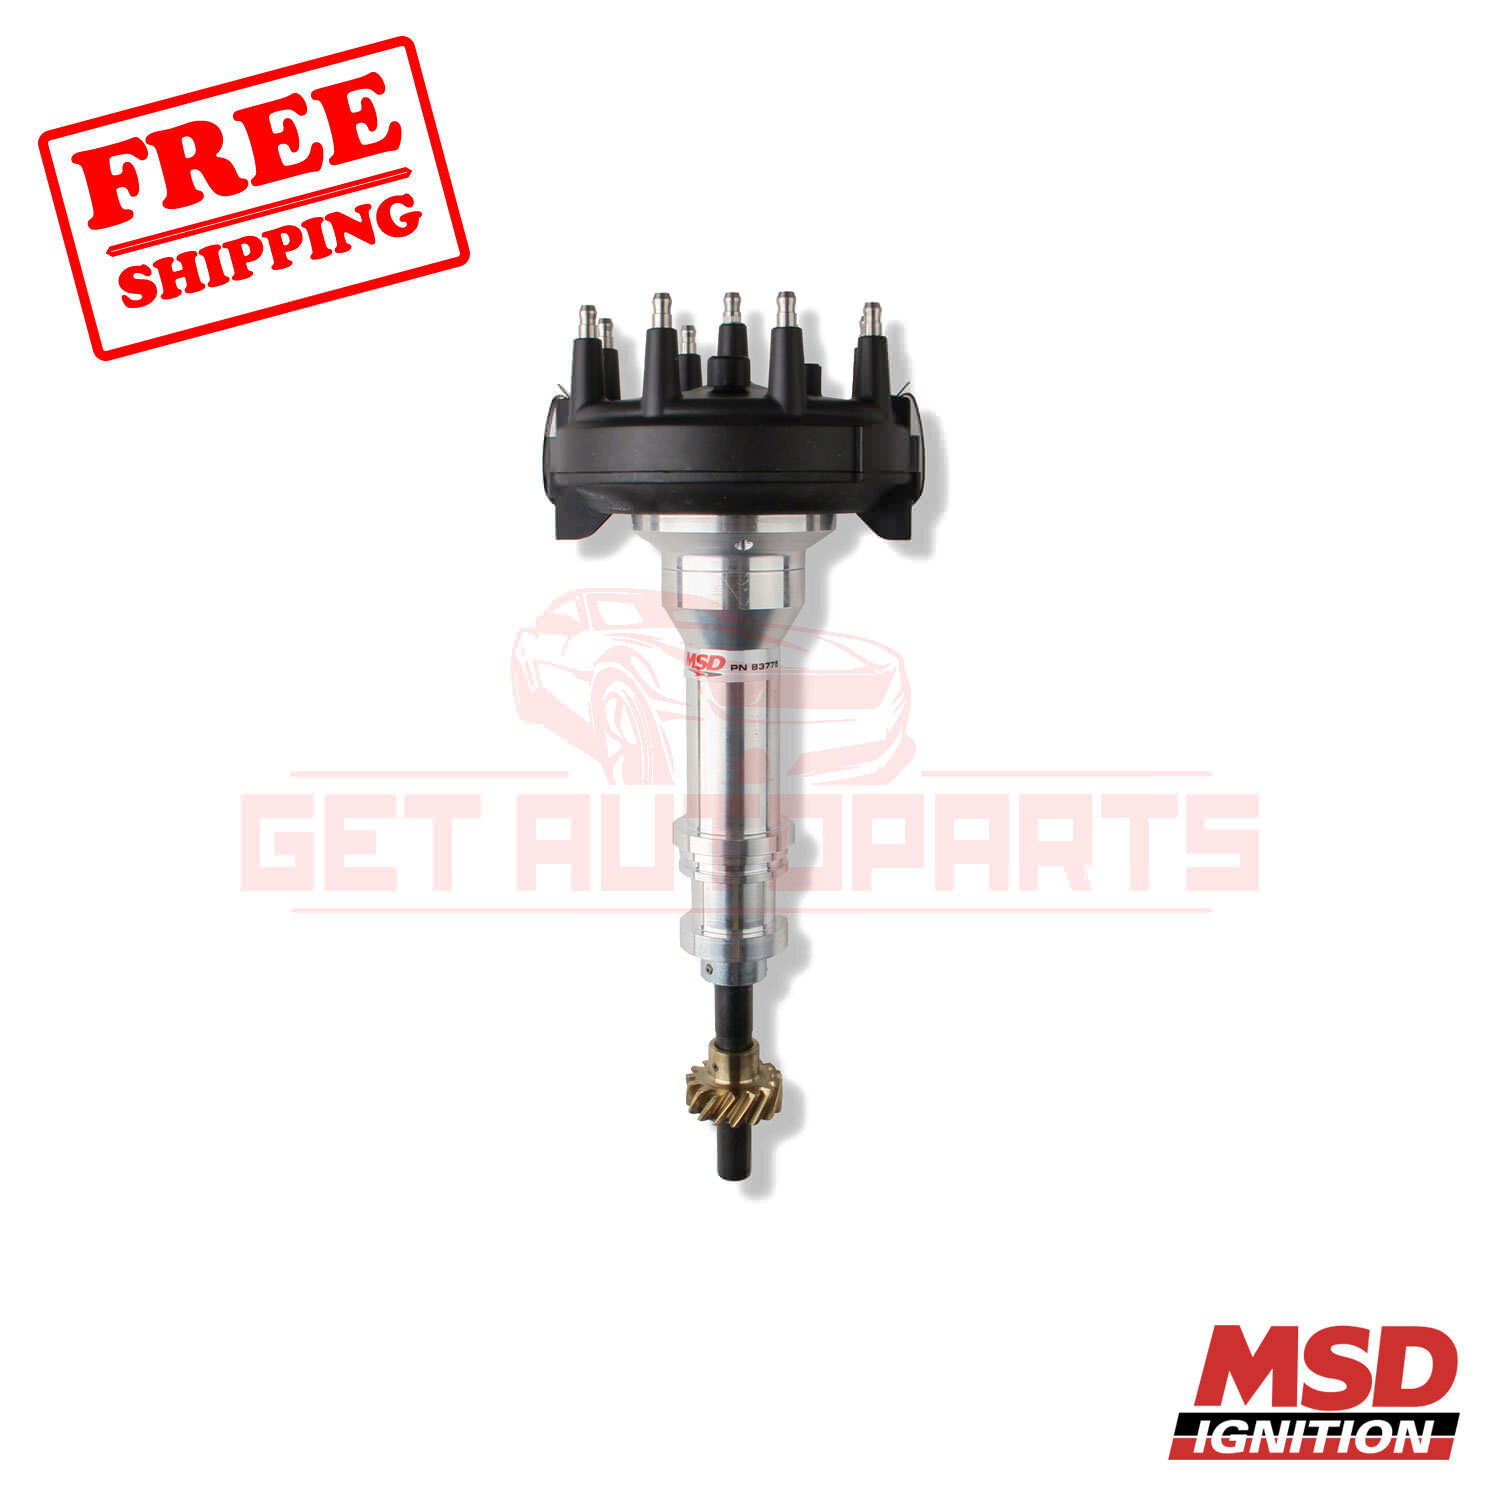 MSD Distributor fits Ford GT40 1964-1969